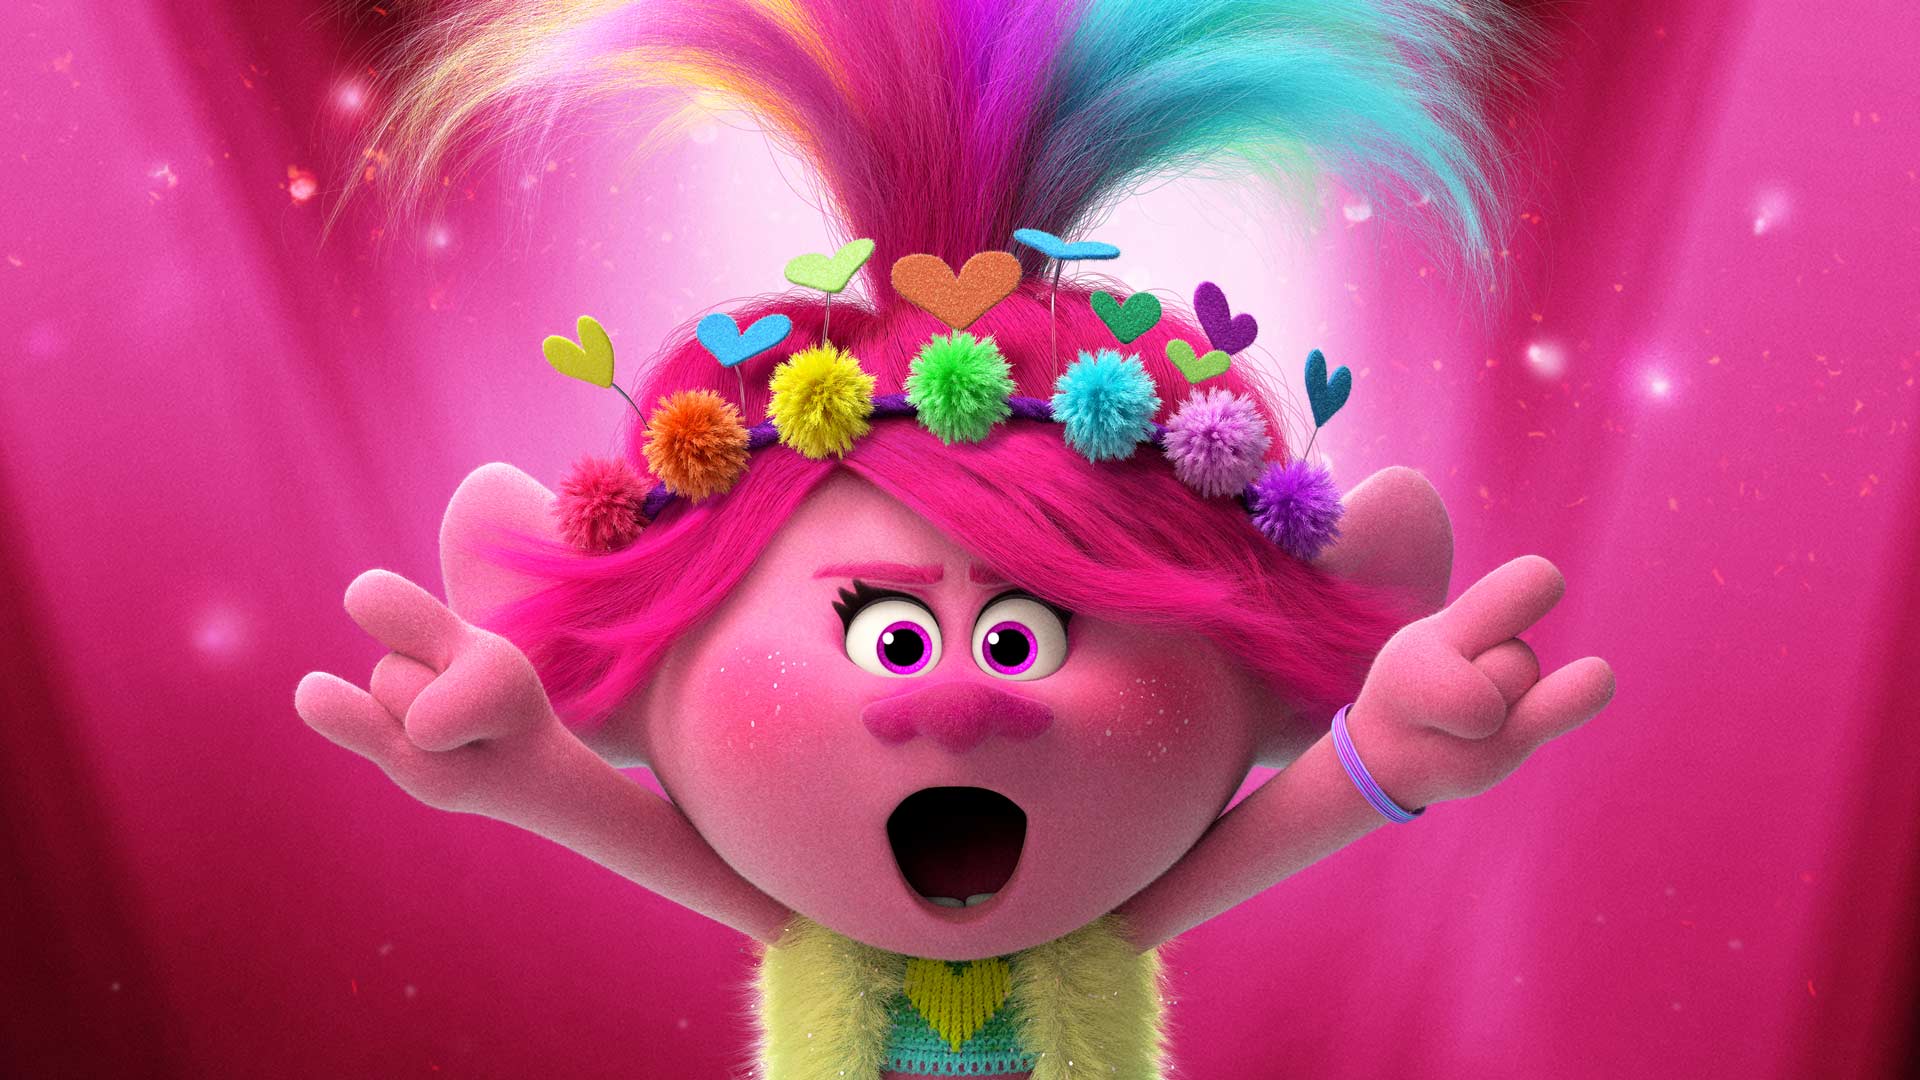 Queen Pupi on the World Tour of Trolls